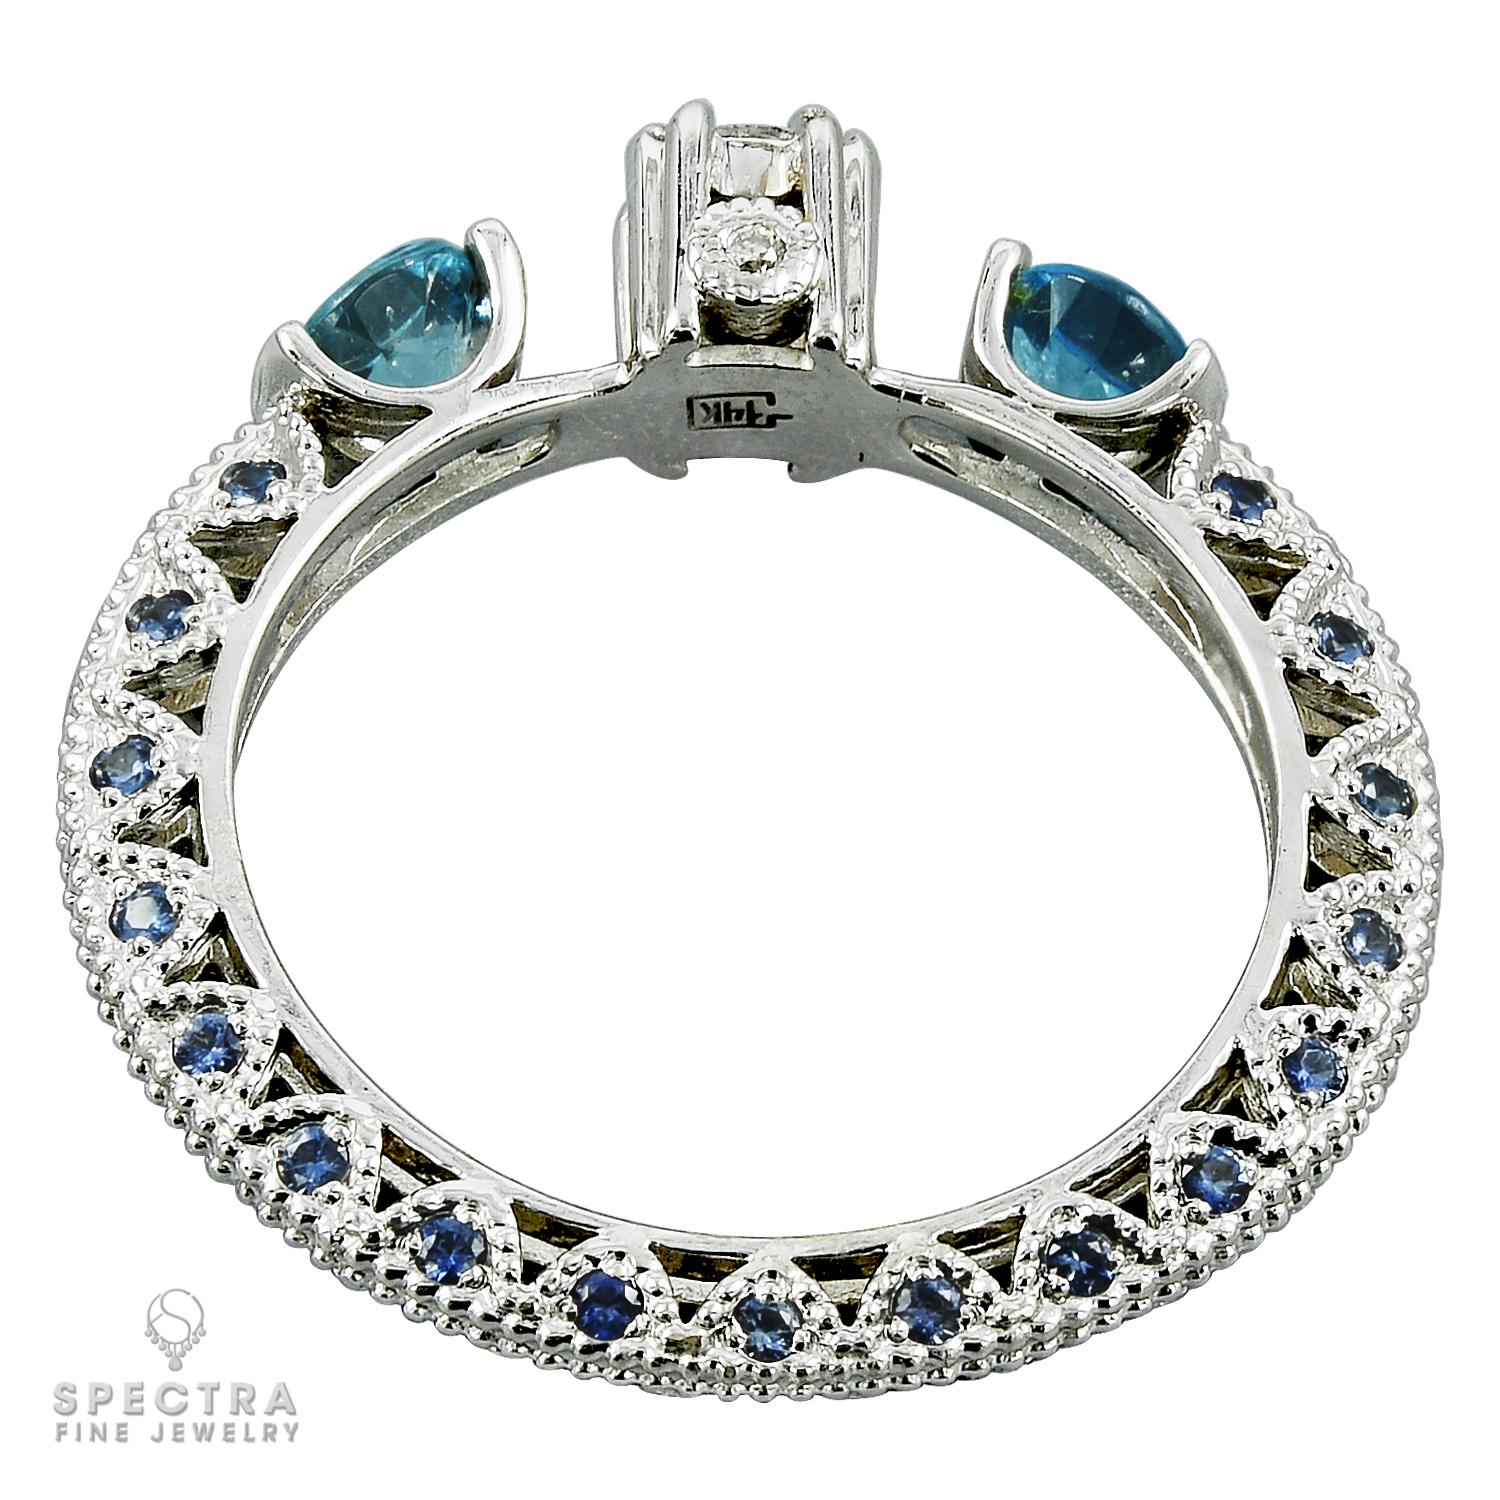 A cocktail ring featuring two blue topaz gemstones in the center and three round diamonds.
Total weight of the diamonds is 0.3 carats.
The band of the ring is encrusted with 34 topaz stones.
Metal is 14k white gold; gross weight is 3.3 gr.
Size 7.75.